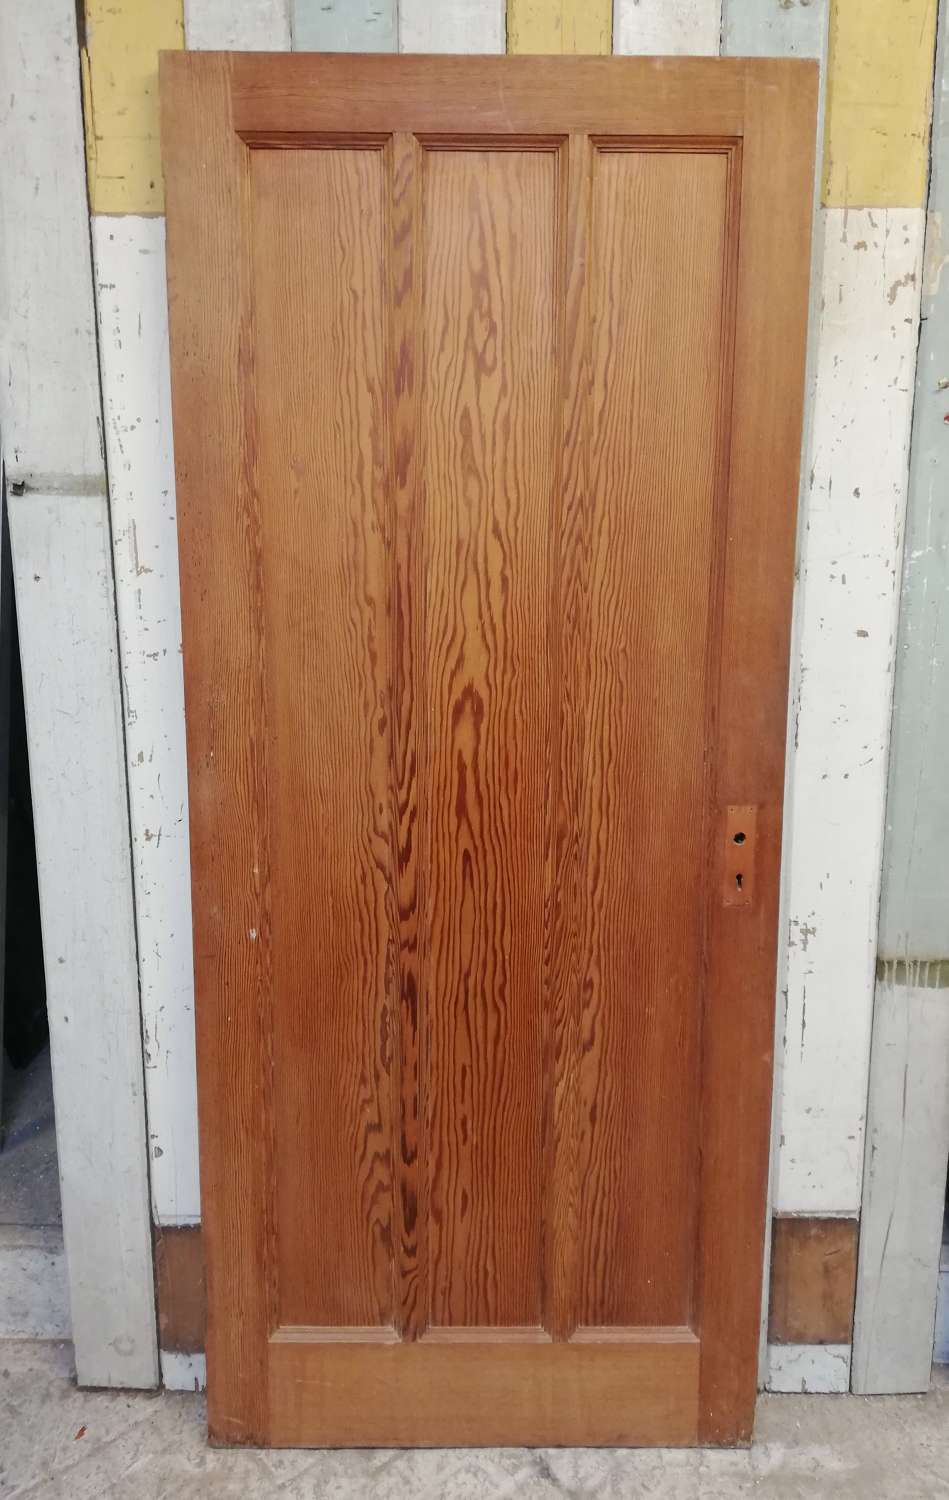 DI0702 A RECLAIMED PITCH PINE ARTS AND CRAFTS INTERNAL DOOR